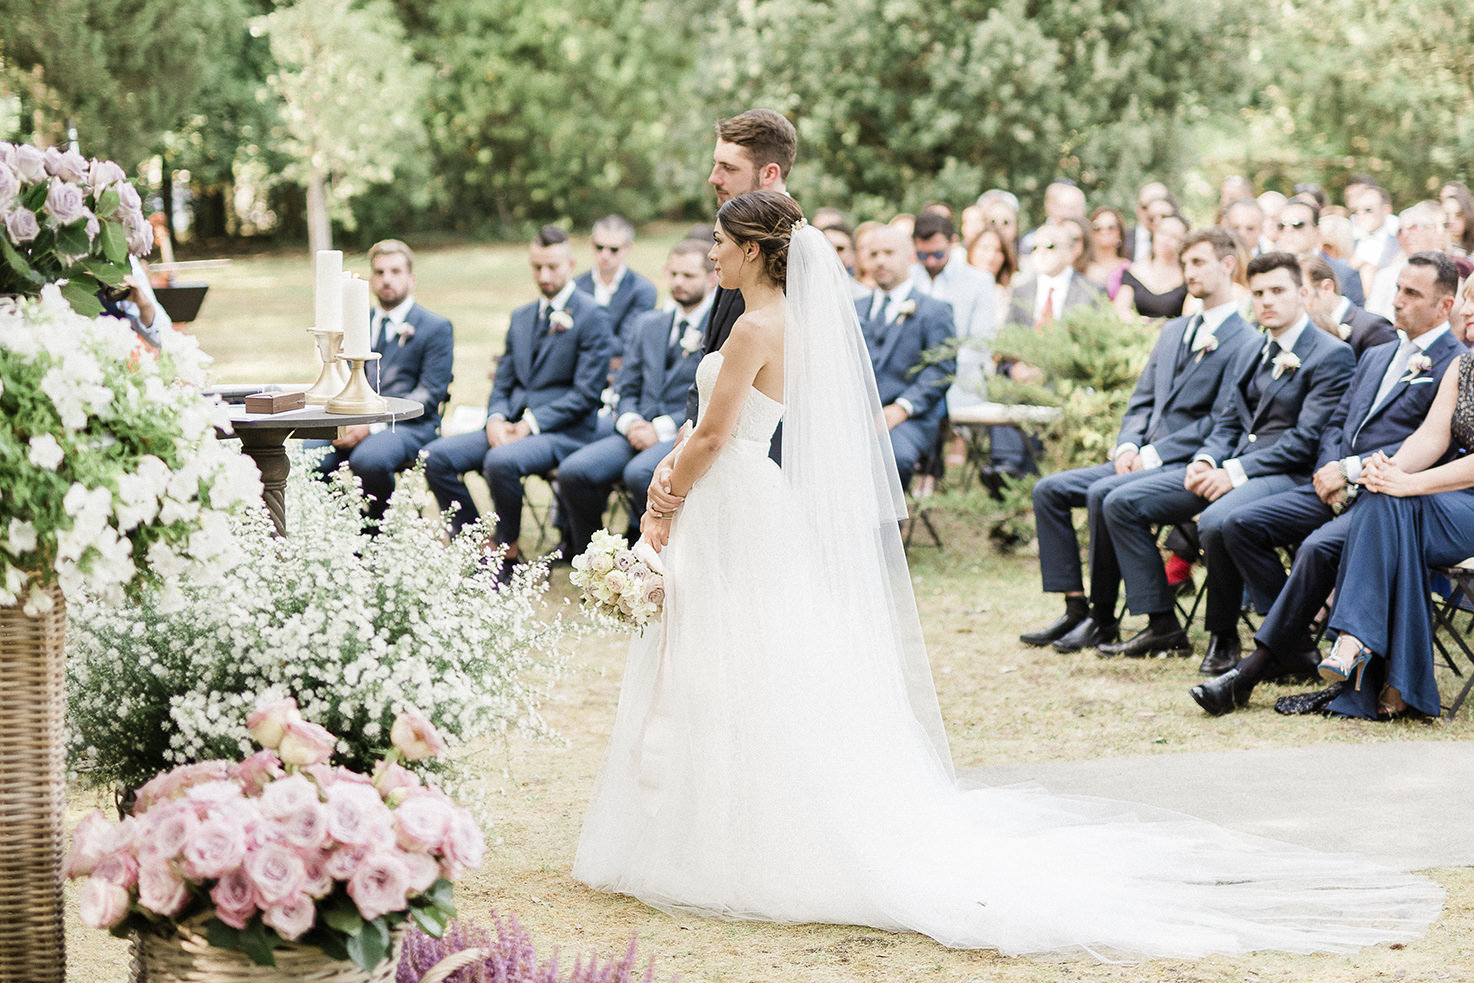 Outdoor wedding ceremony in a garden in Tuscany